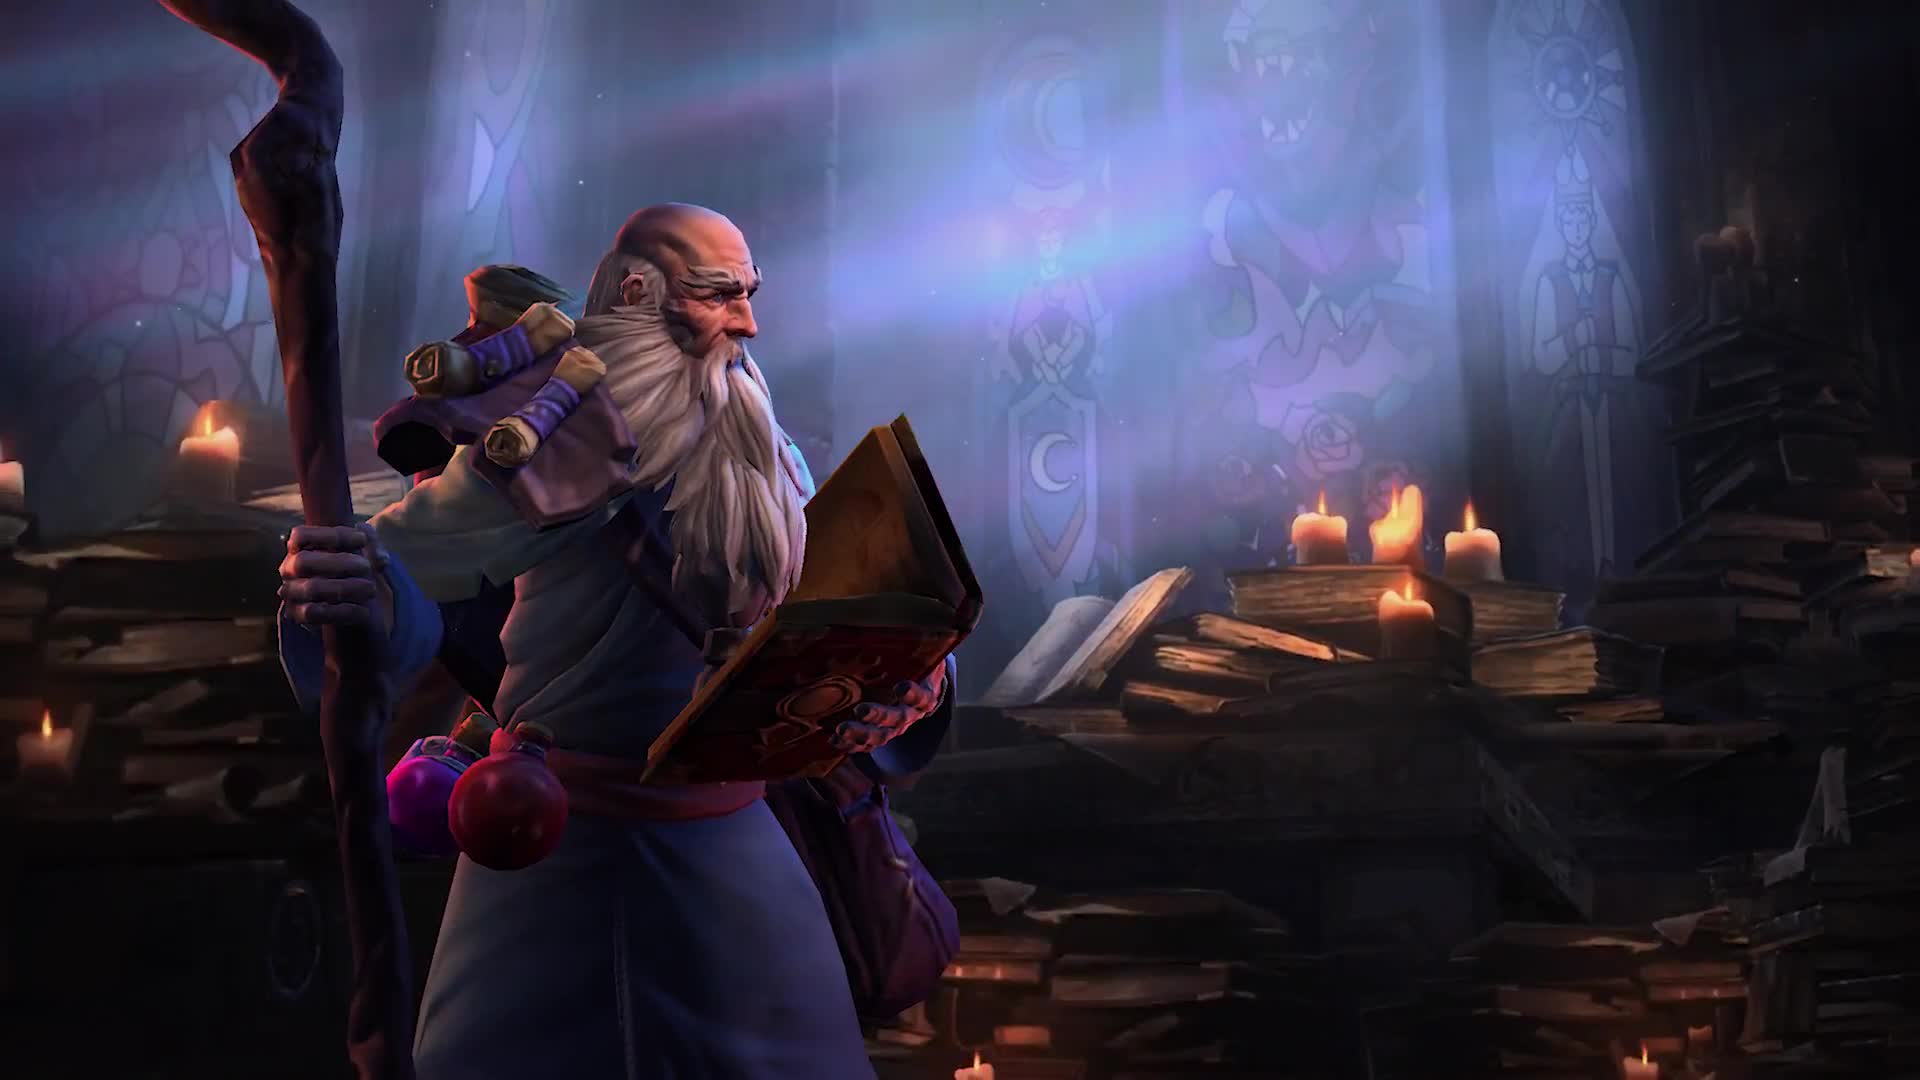 Heroes Of The Storm - Deckard Cain - trailer